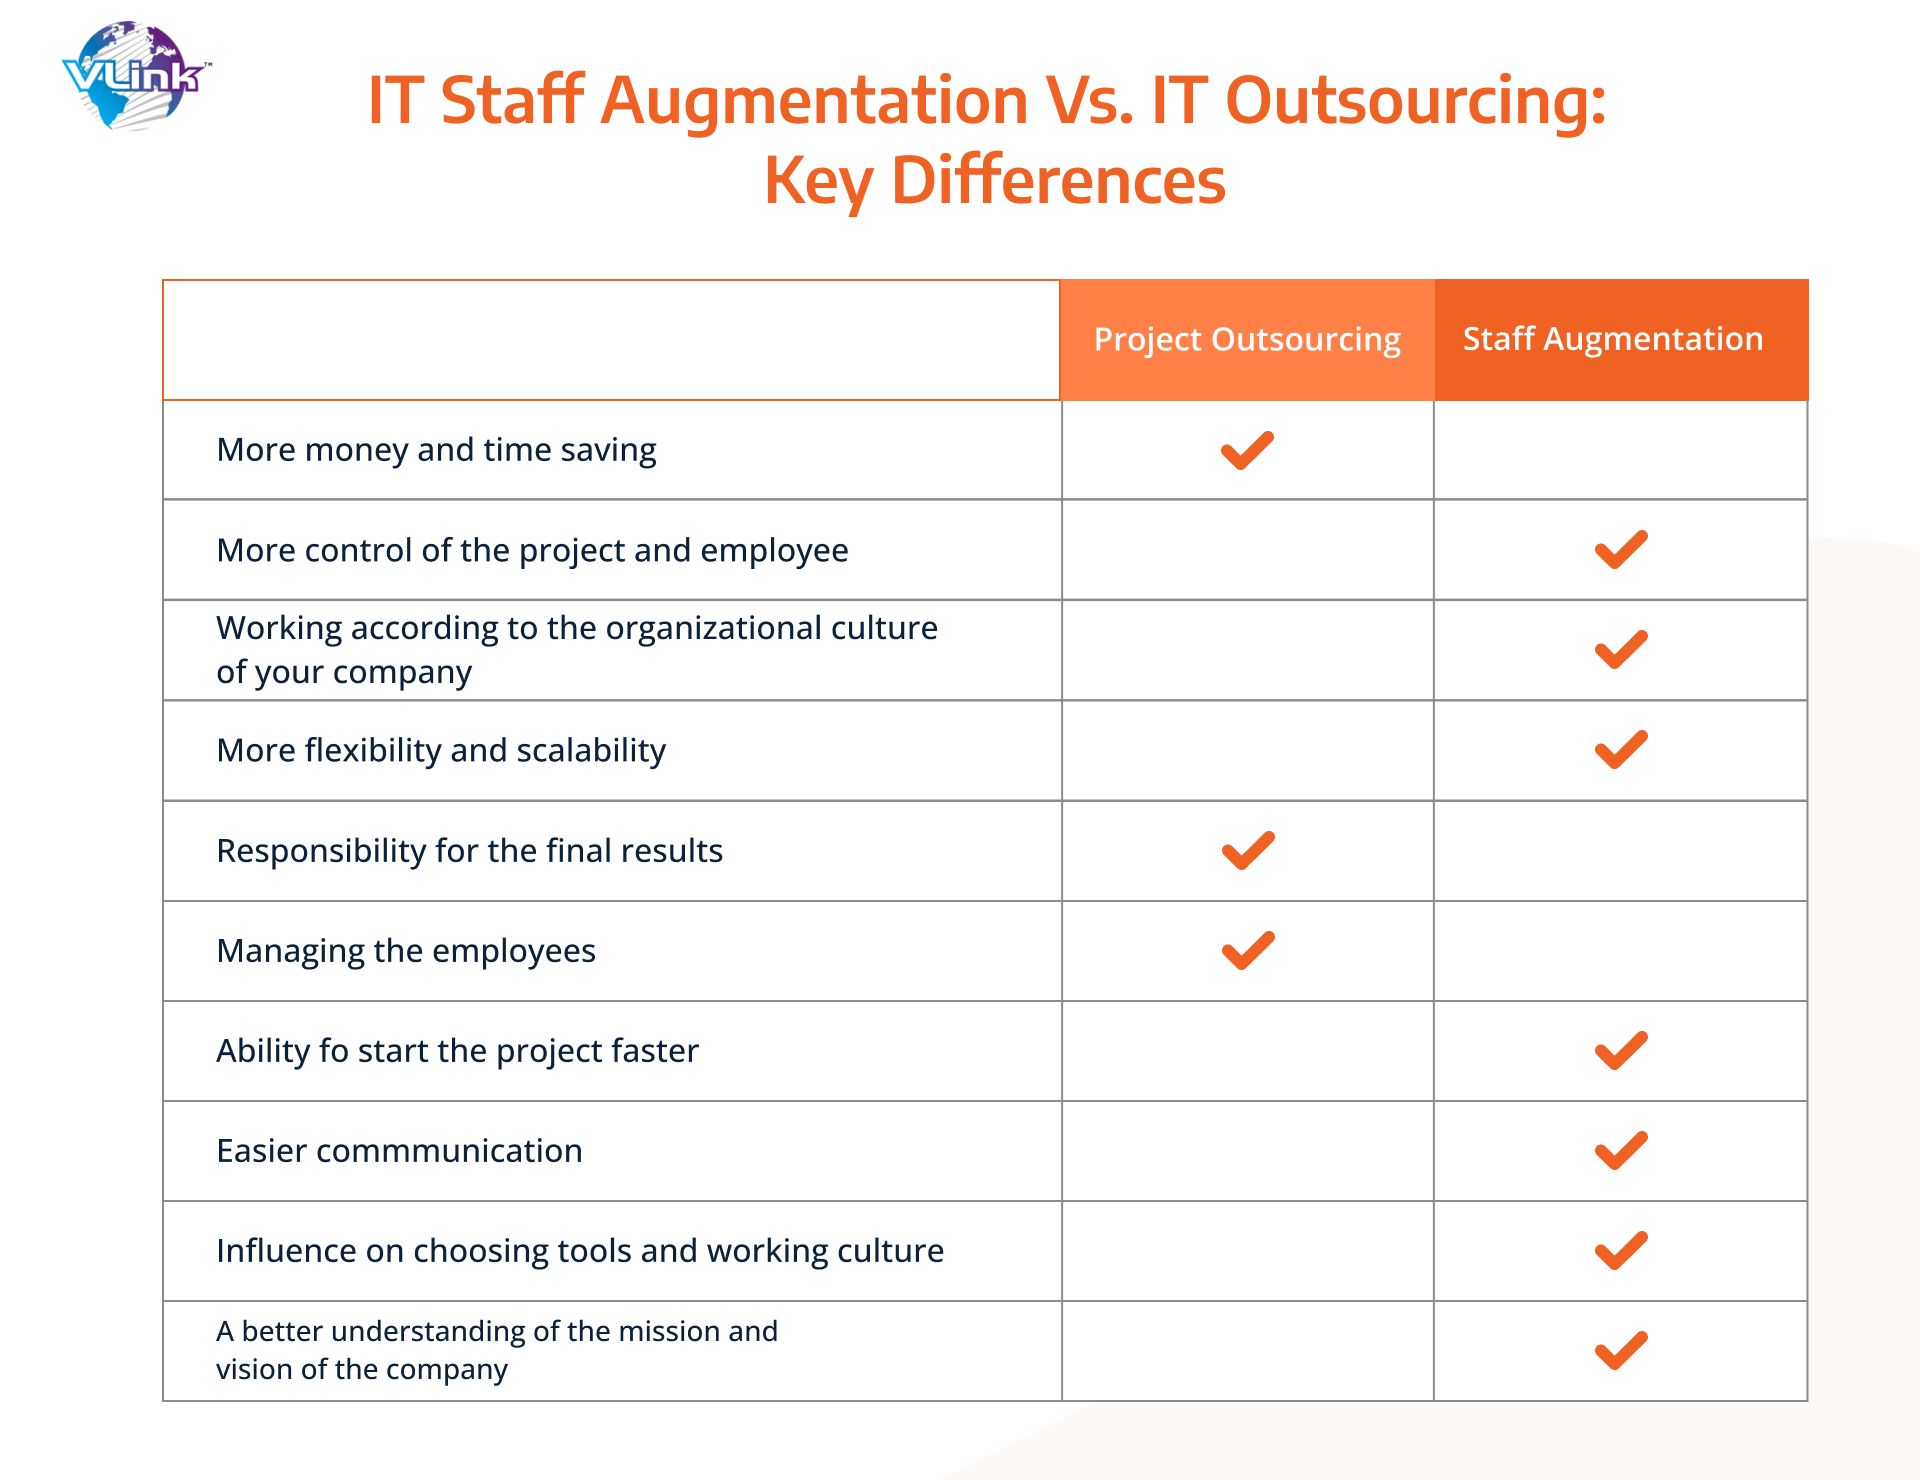 How Does IT Staff Augmentation Differ from Outsourcing Models